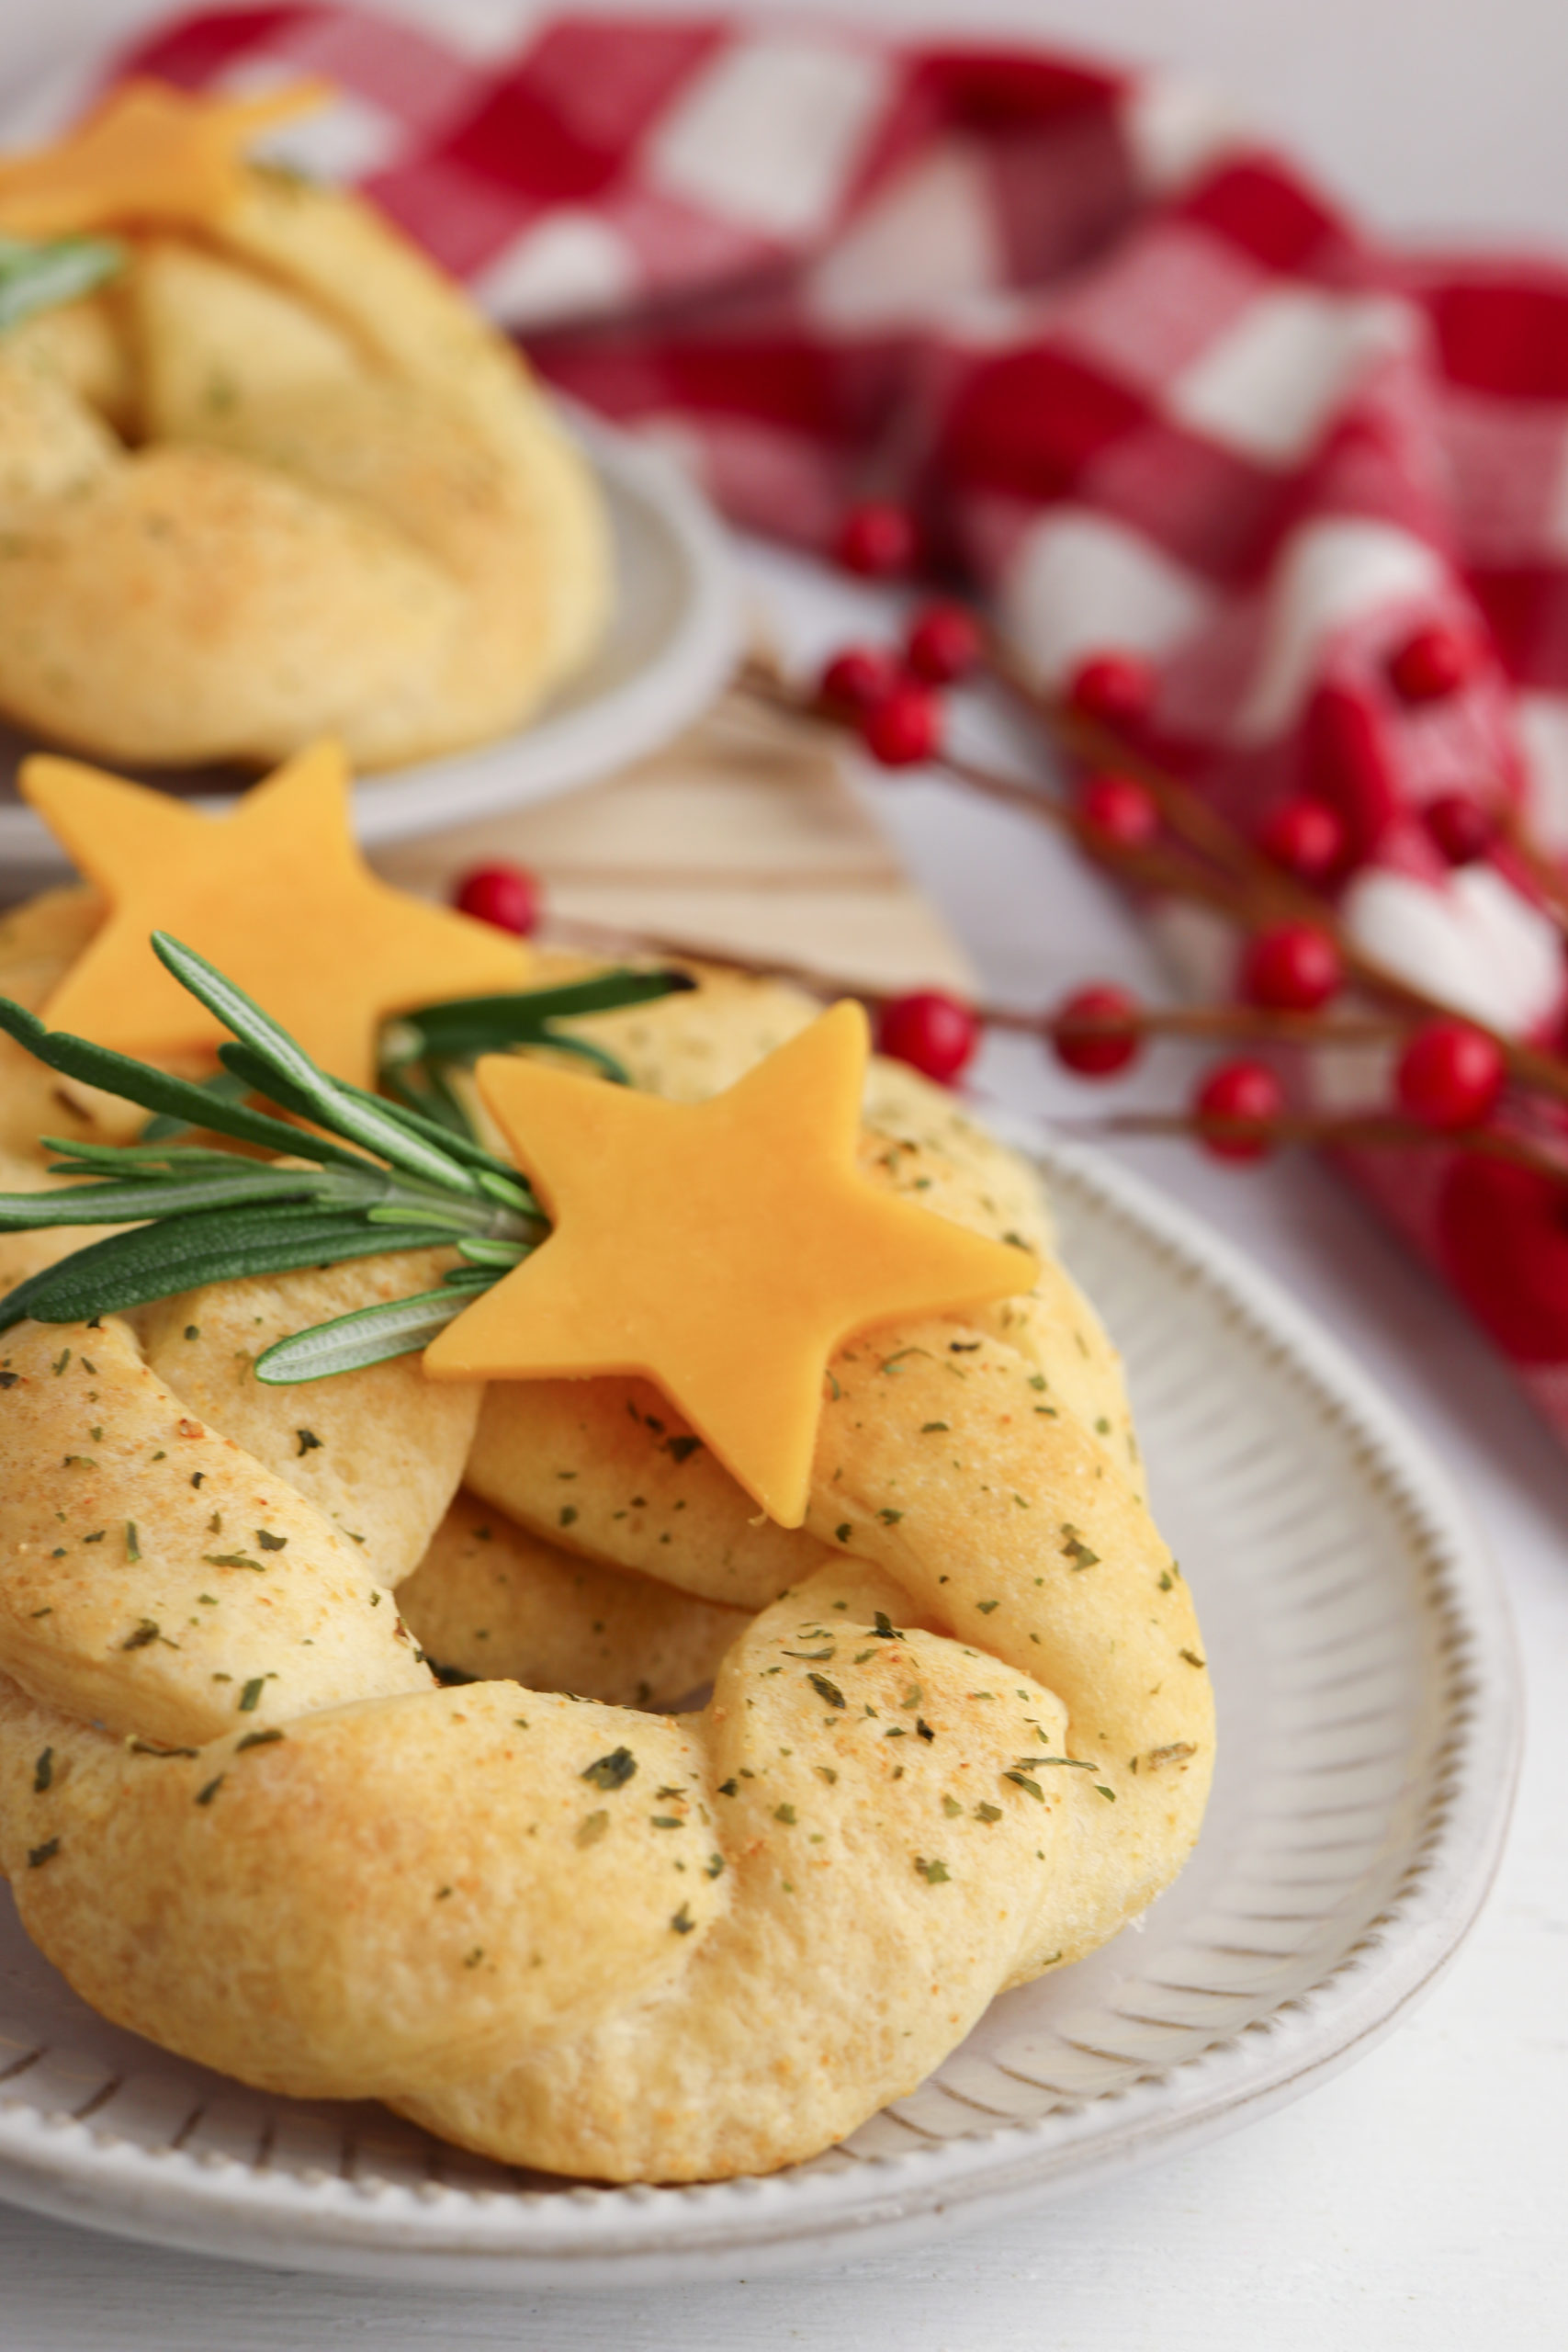 Crescent roll wreath with rosemary sprig and cheese star